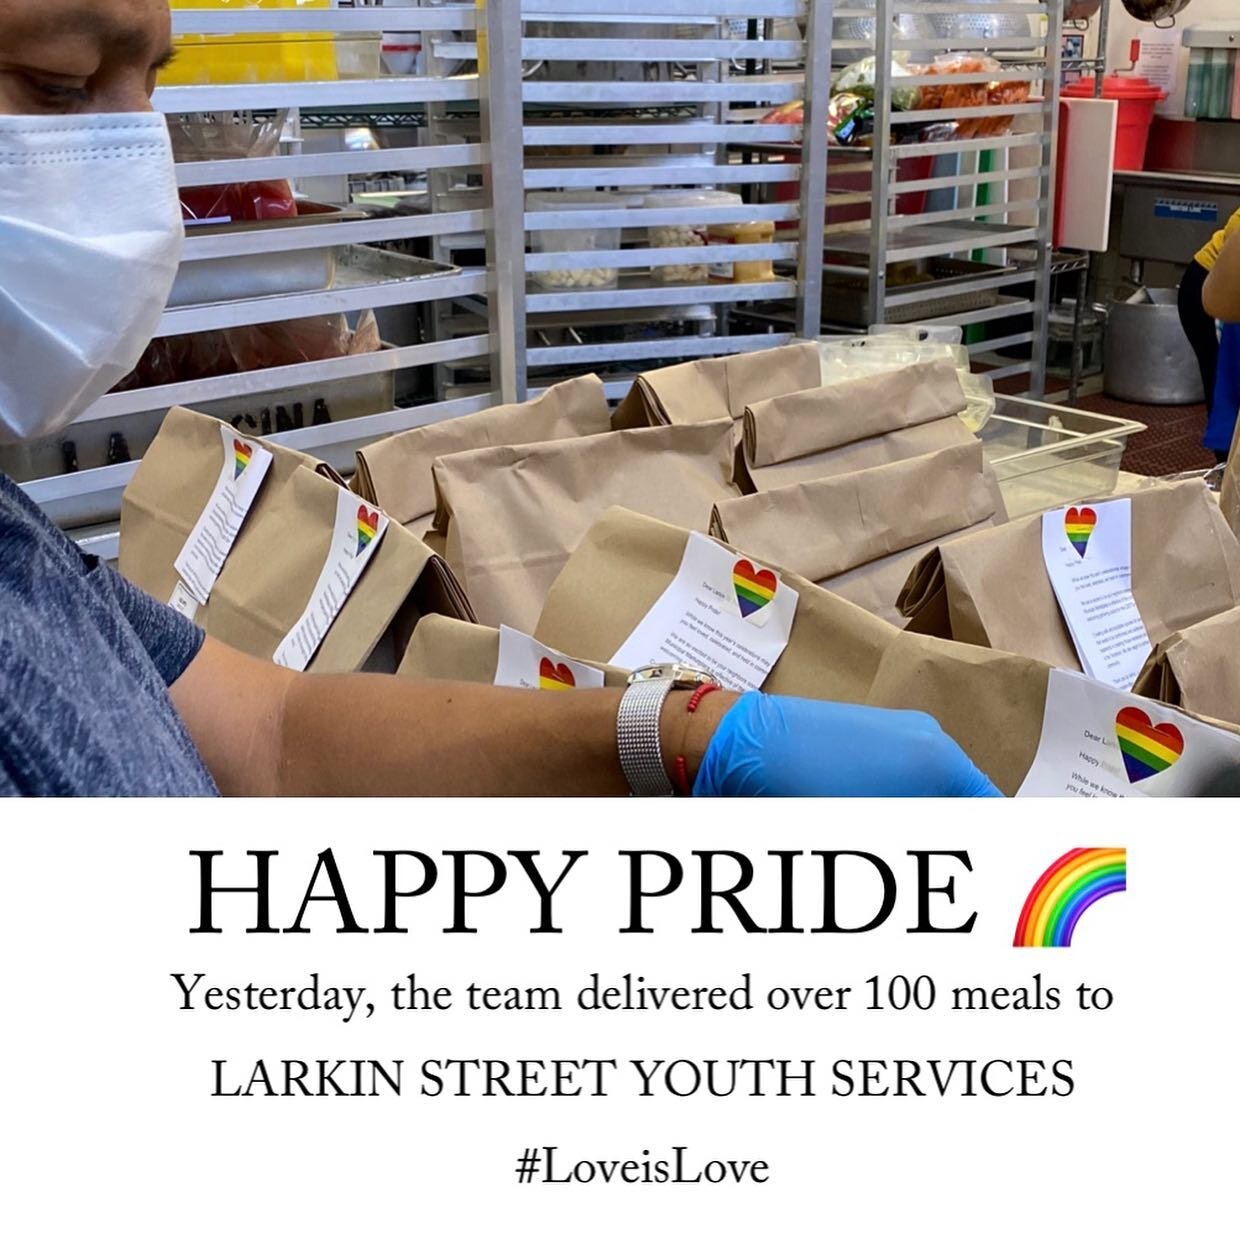 𝙃𝘼𝙋𝙋𝙔 𝙋𝙍𝙄𝘿𝙀 🌈✨ ❤️🧡💛💚💙💜
&bull;
Yesterday, our team delivered over 100 meals to @larkinstreetyouth to help celebrate LGTBQ+ youth within our communities. We hope that everyone feels loved + celebrated.
&bull;
We truly appreciate &amp; s